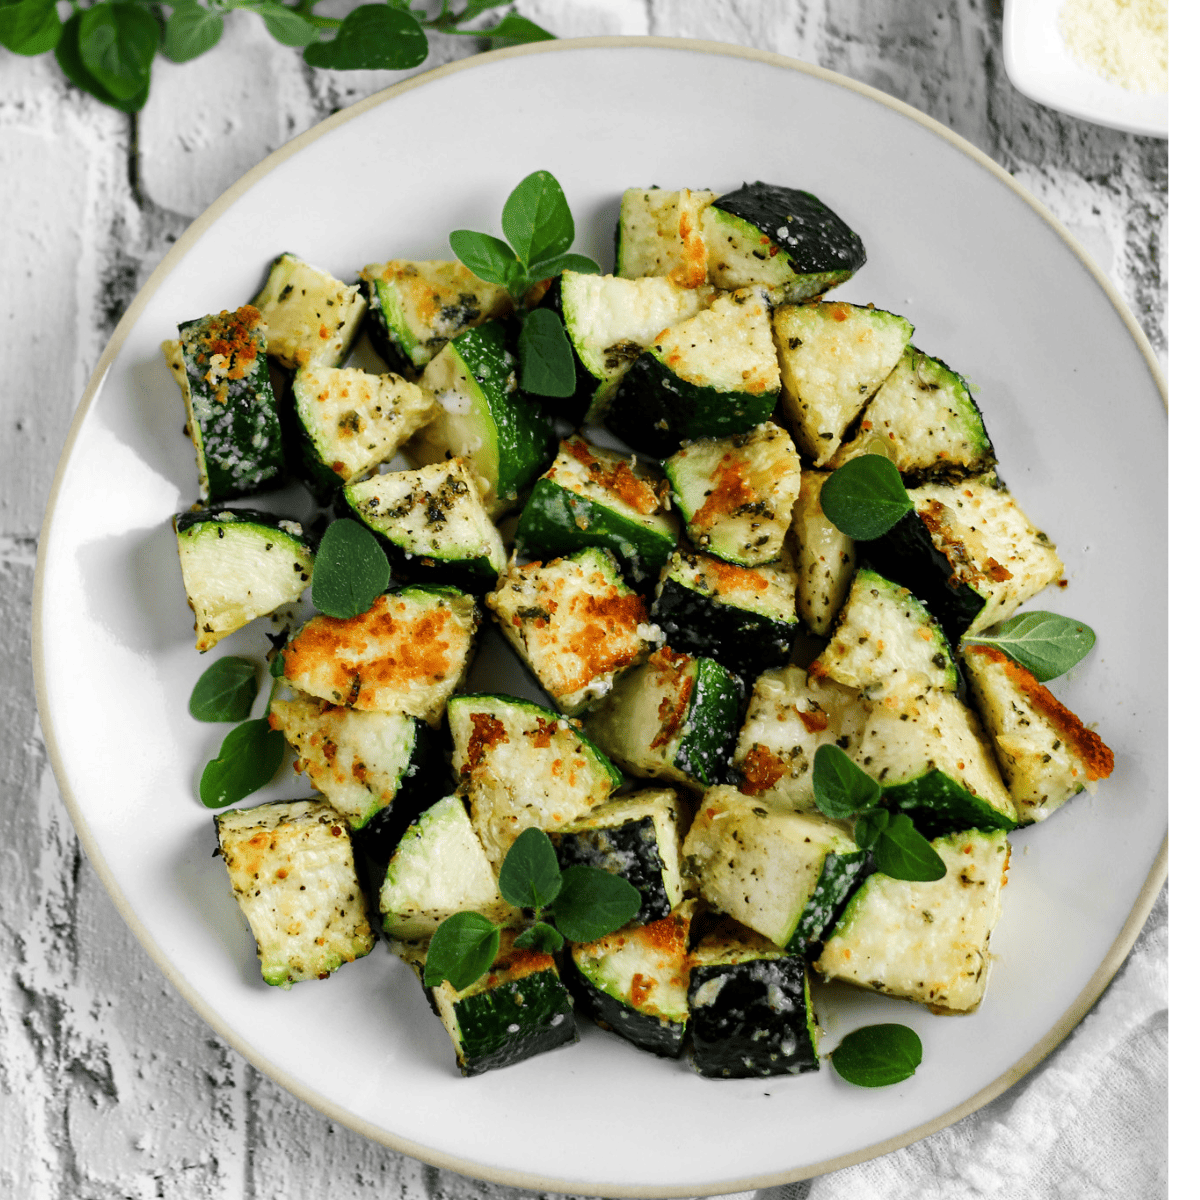 Finish dish of roasted zucchini in a plate.